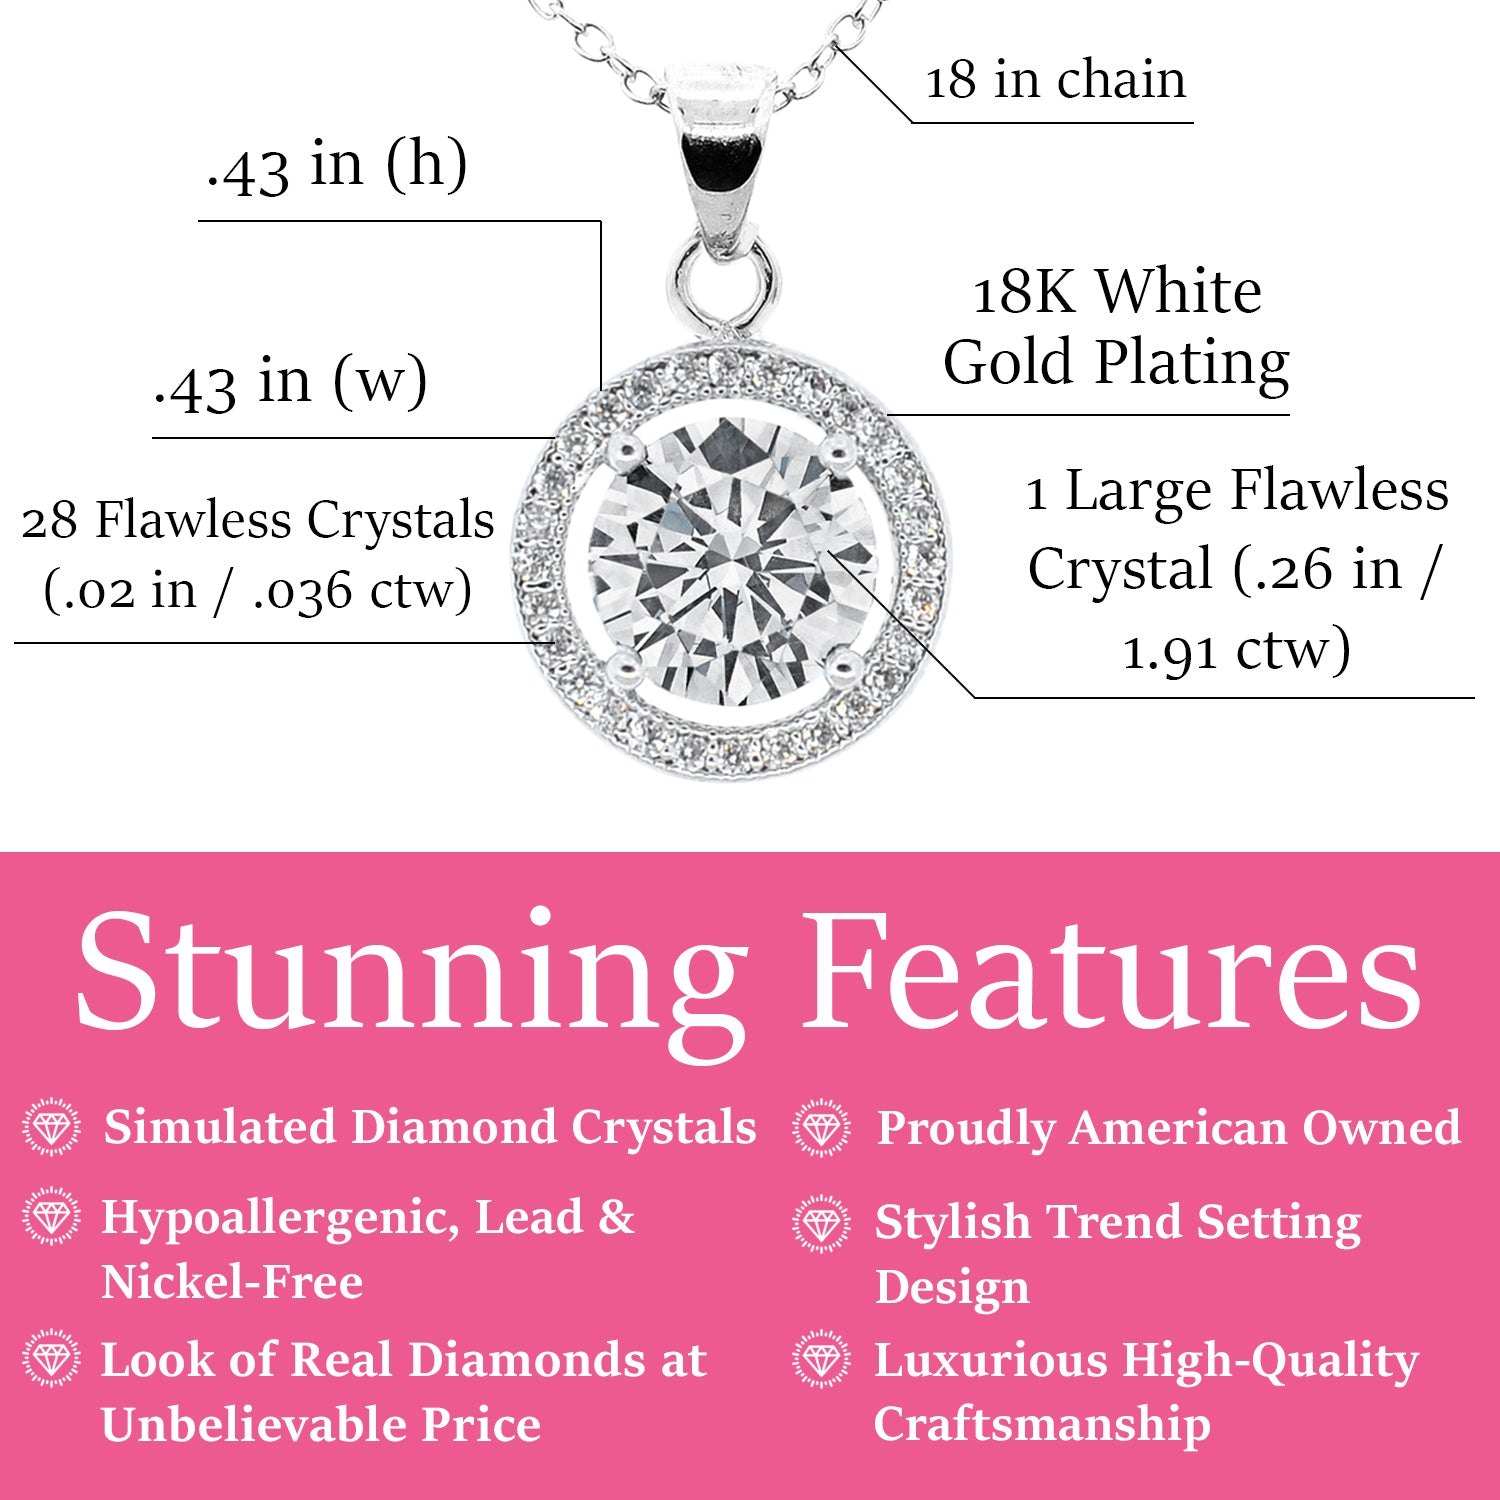 Blake 18k White Gold Plated Halo Pendant Necklace with CZ Crystals